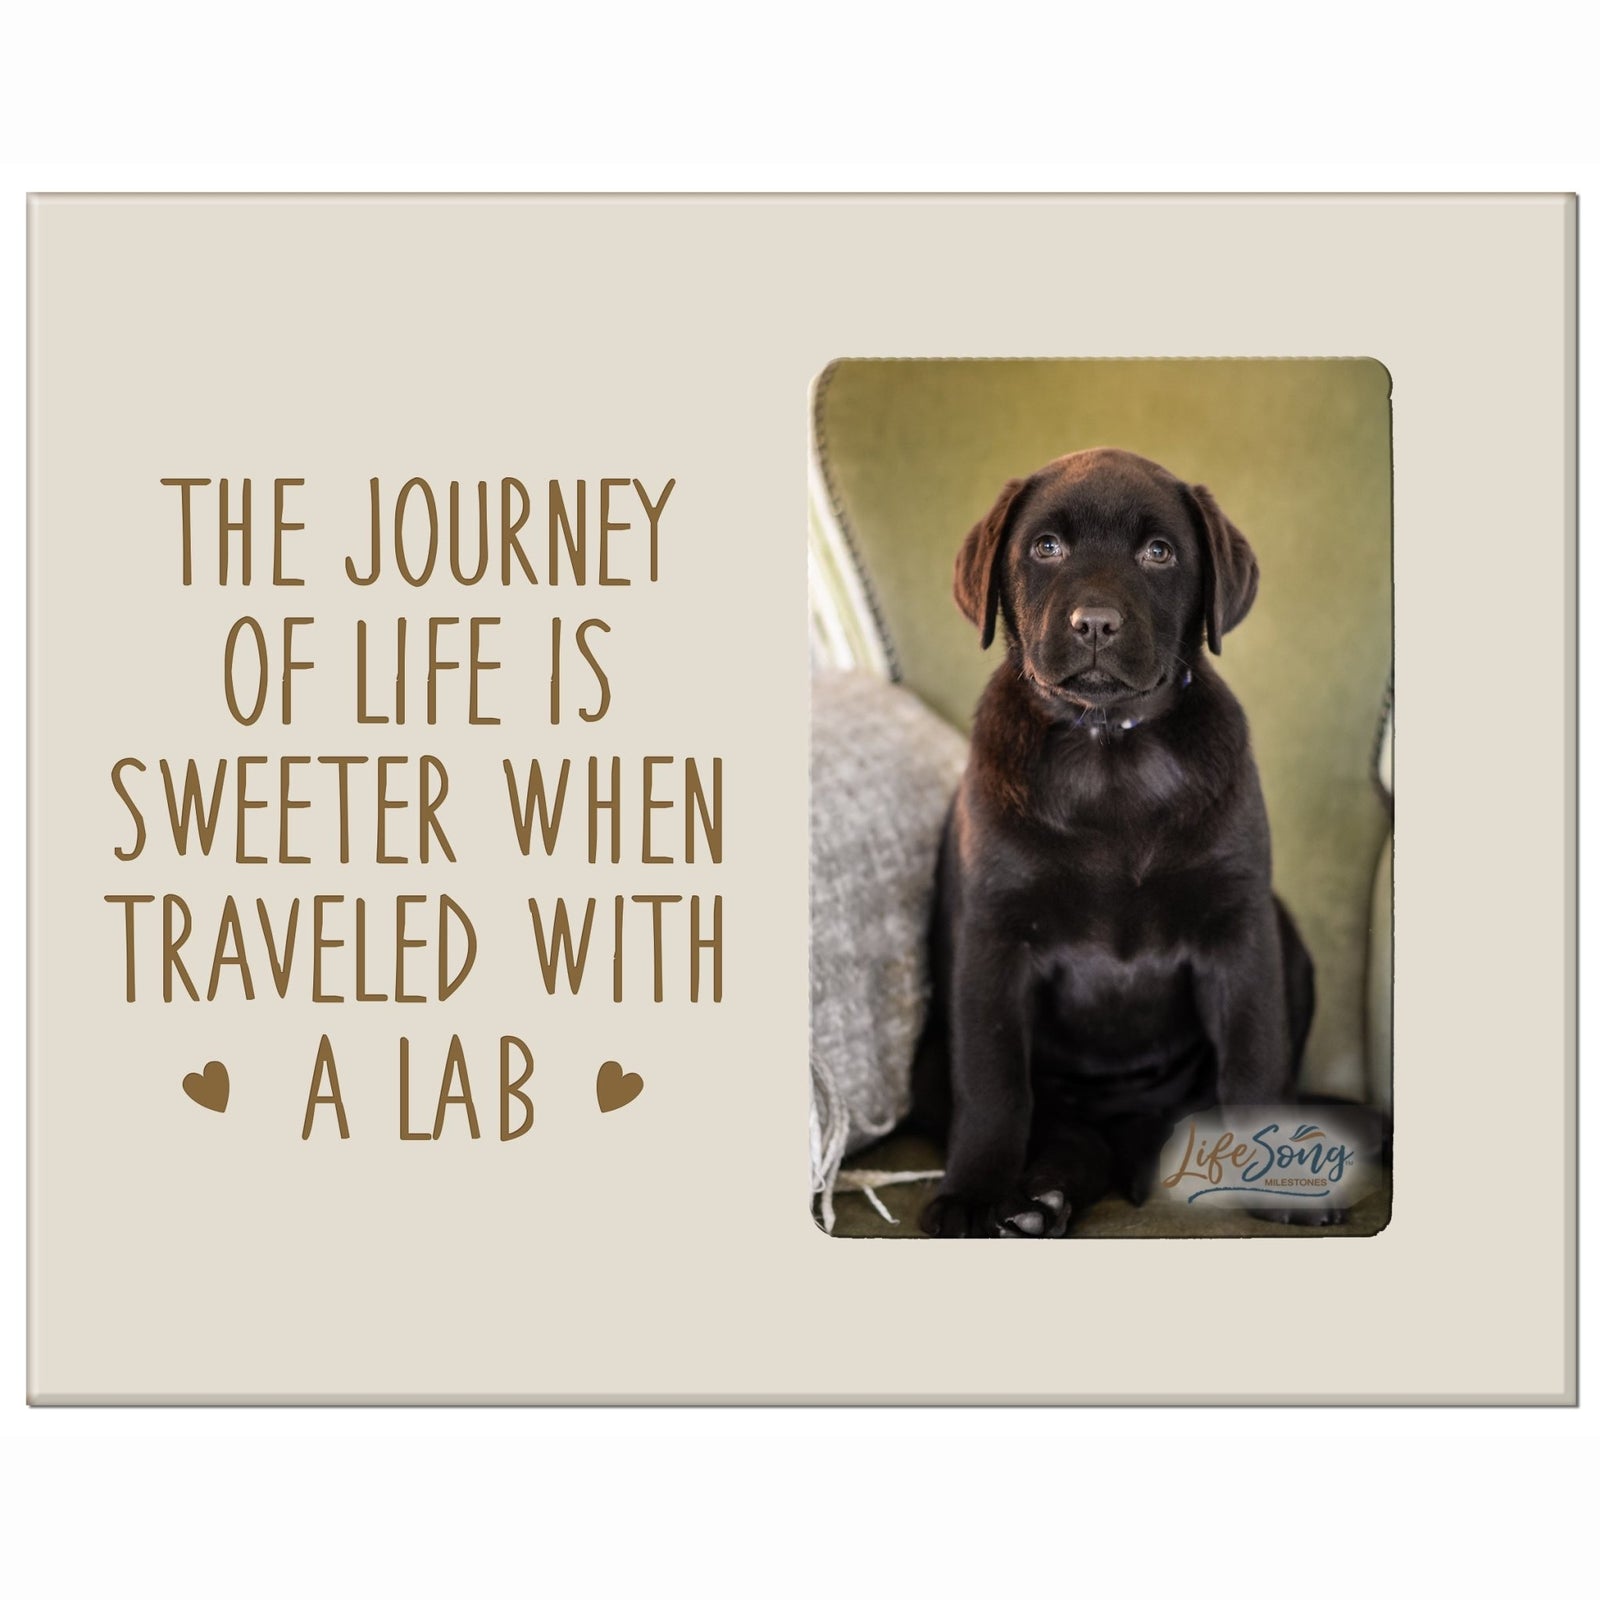 Inspirational Wooden 8x10 Picture Frame for Pet Dogs holds 4x6 photo The Journey Of Life - LifeSong Milestones